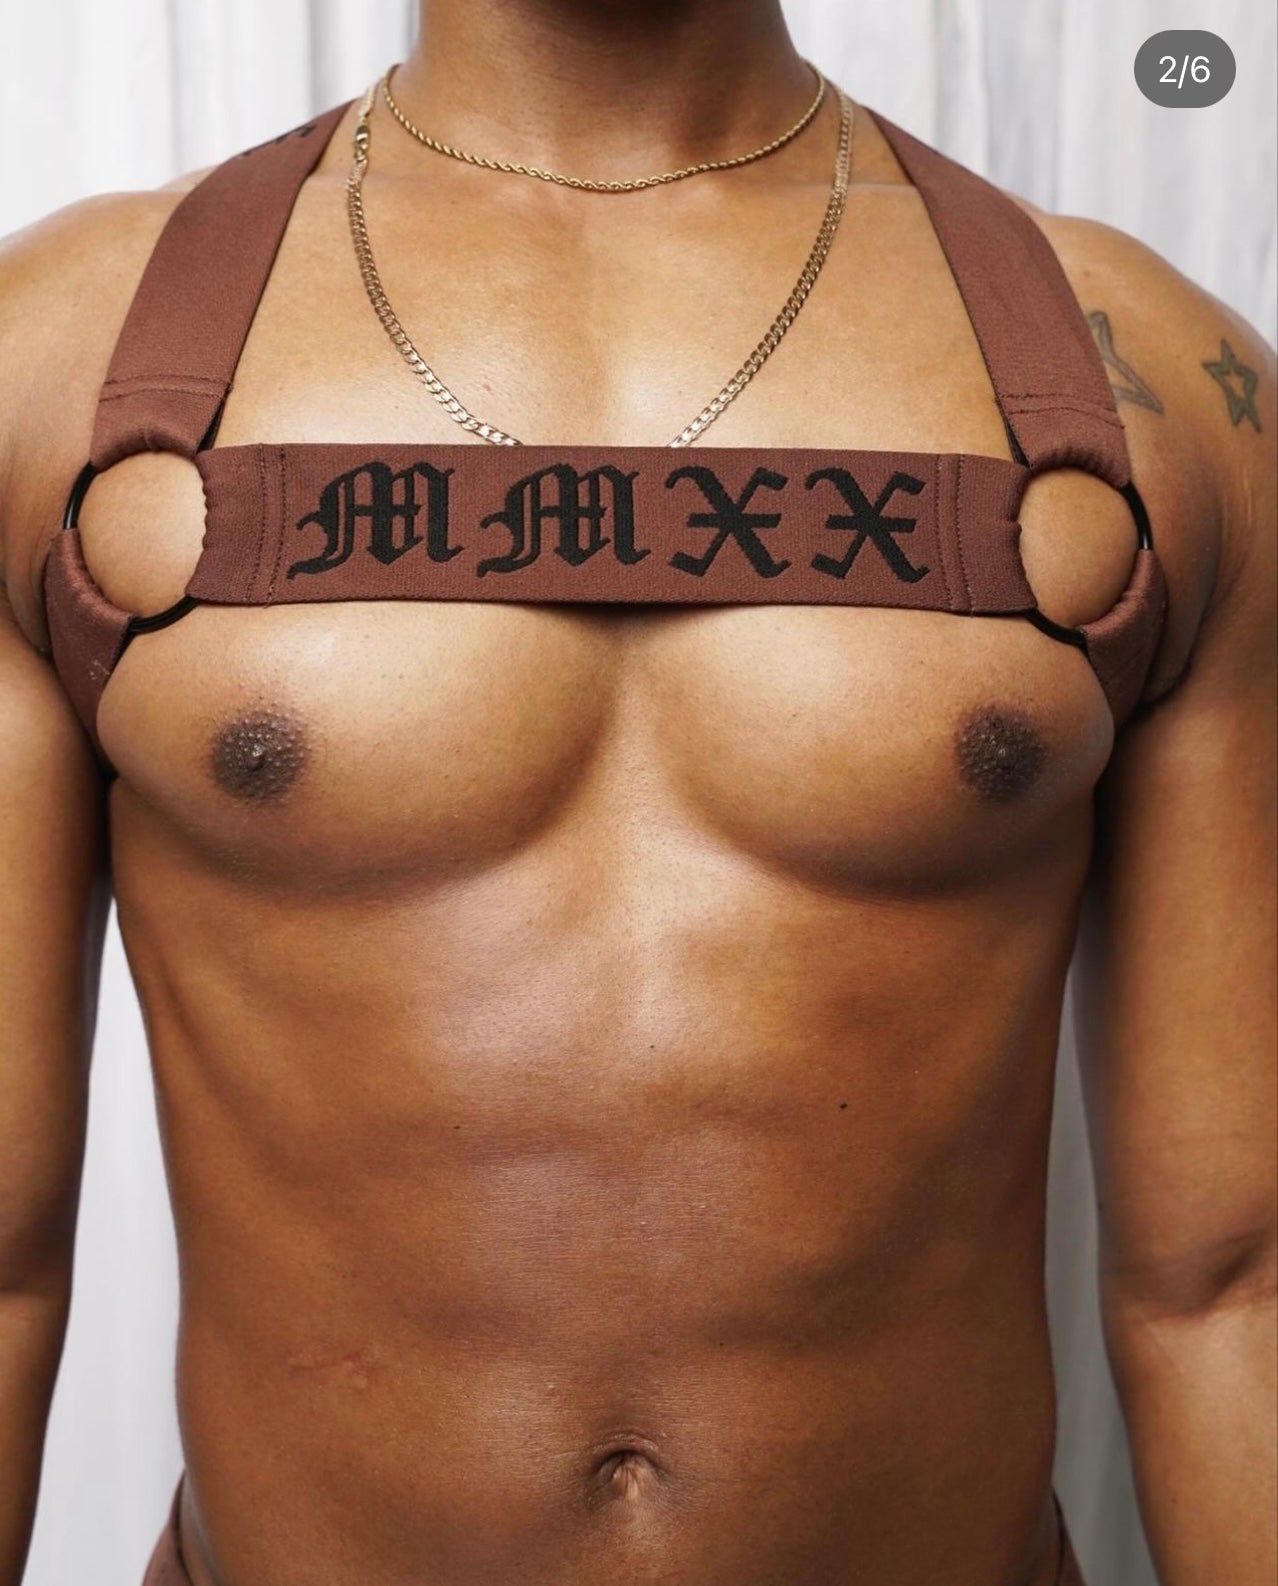 The Basquiat Nude Harness